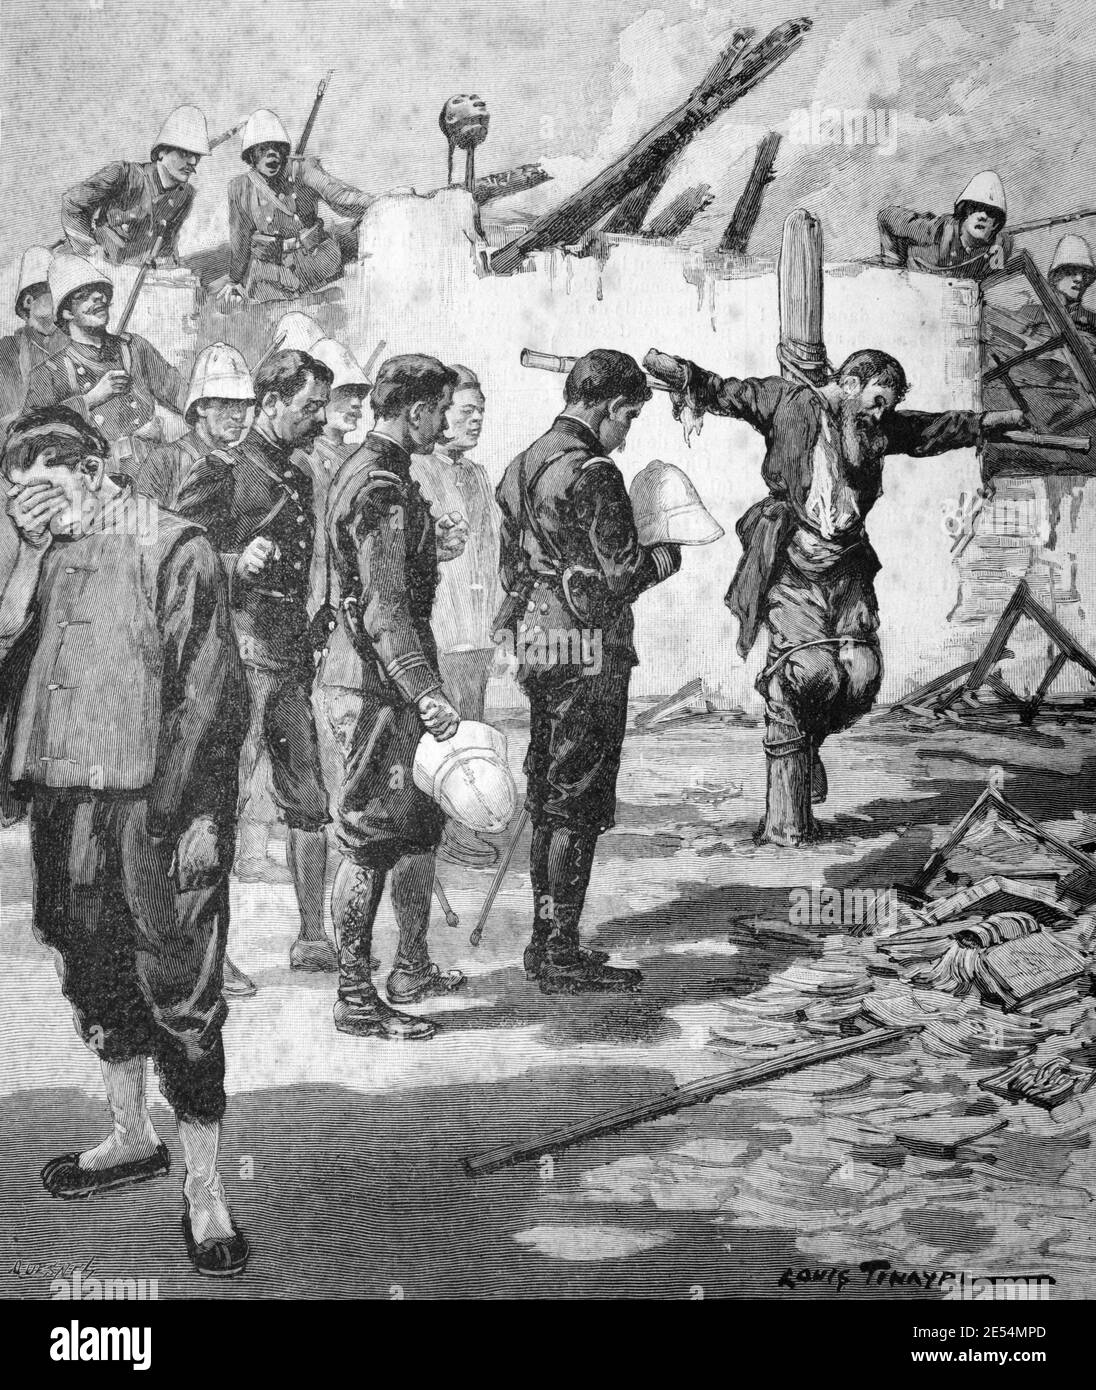 Enemy European Prisoners Executed & Crucified during the Boxer Rebellion, aka the Boxer Uprising or Yihetuan Movement an Anti-Imperialist, Anti-Foreign and Anti-Christian War or Rebellion in China (1899-1901) 1901 Vintage Illustration or Engraving Stock Photo